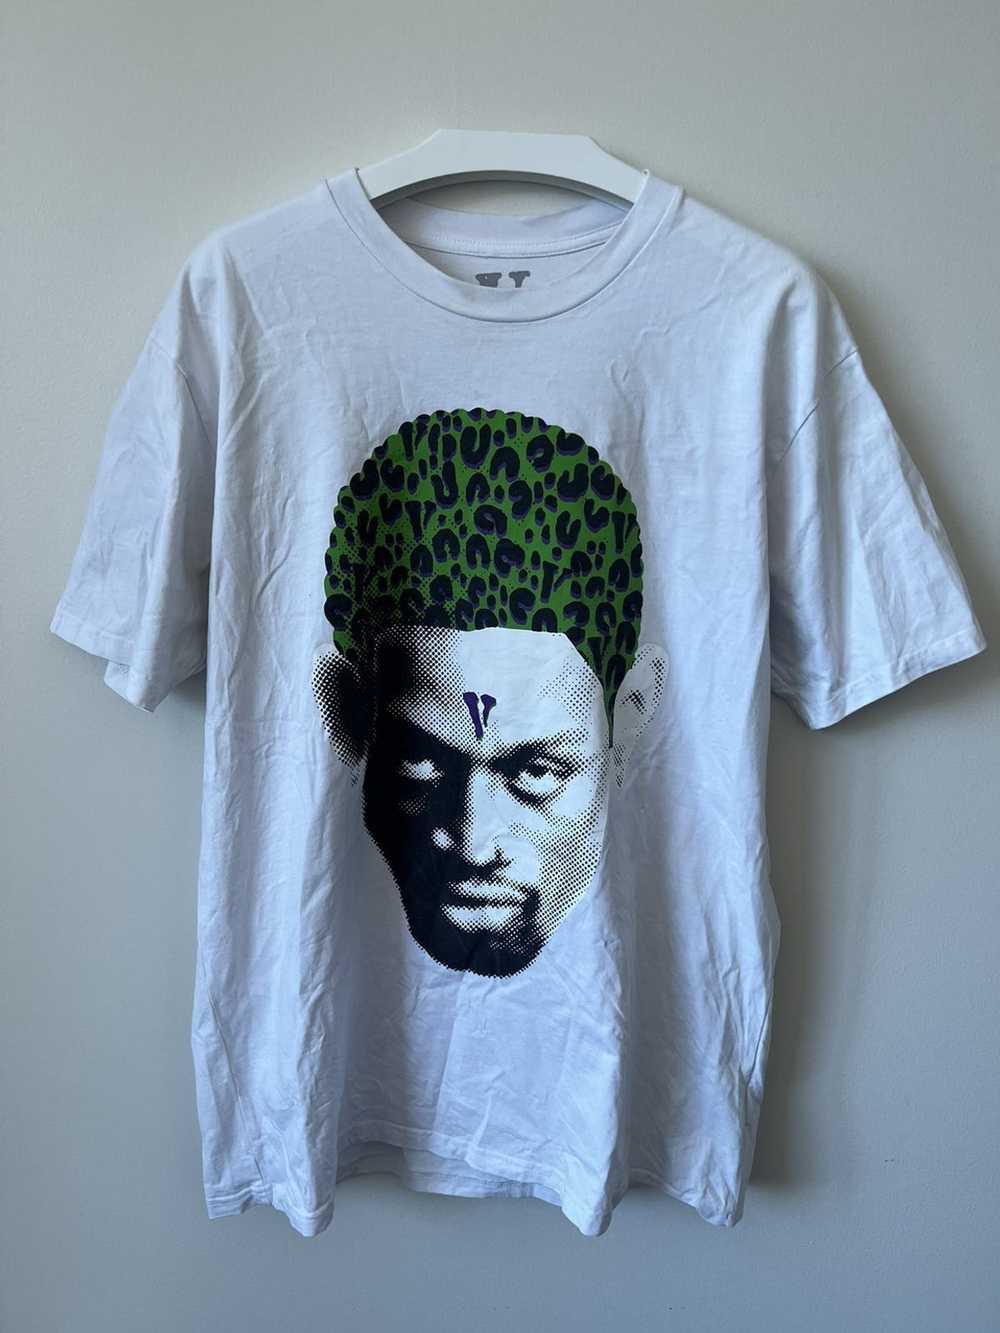 WHITE “The G.O.A.T” DENNIS RODMAN AUTHENTIC SCREEN PRINTED GRAPHIC T-SHIRT